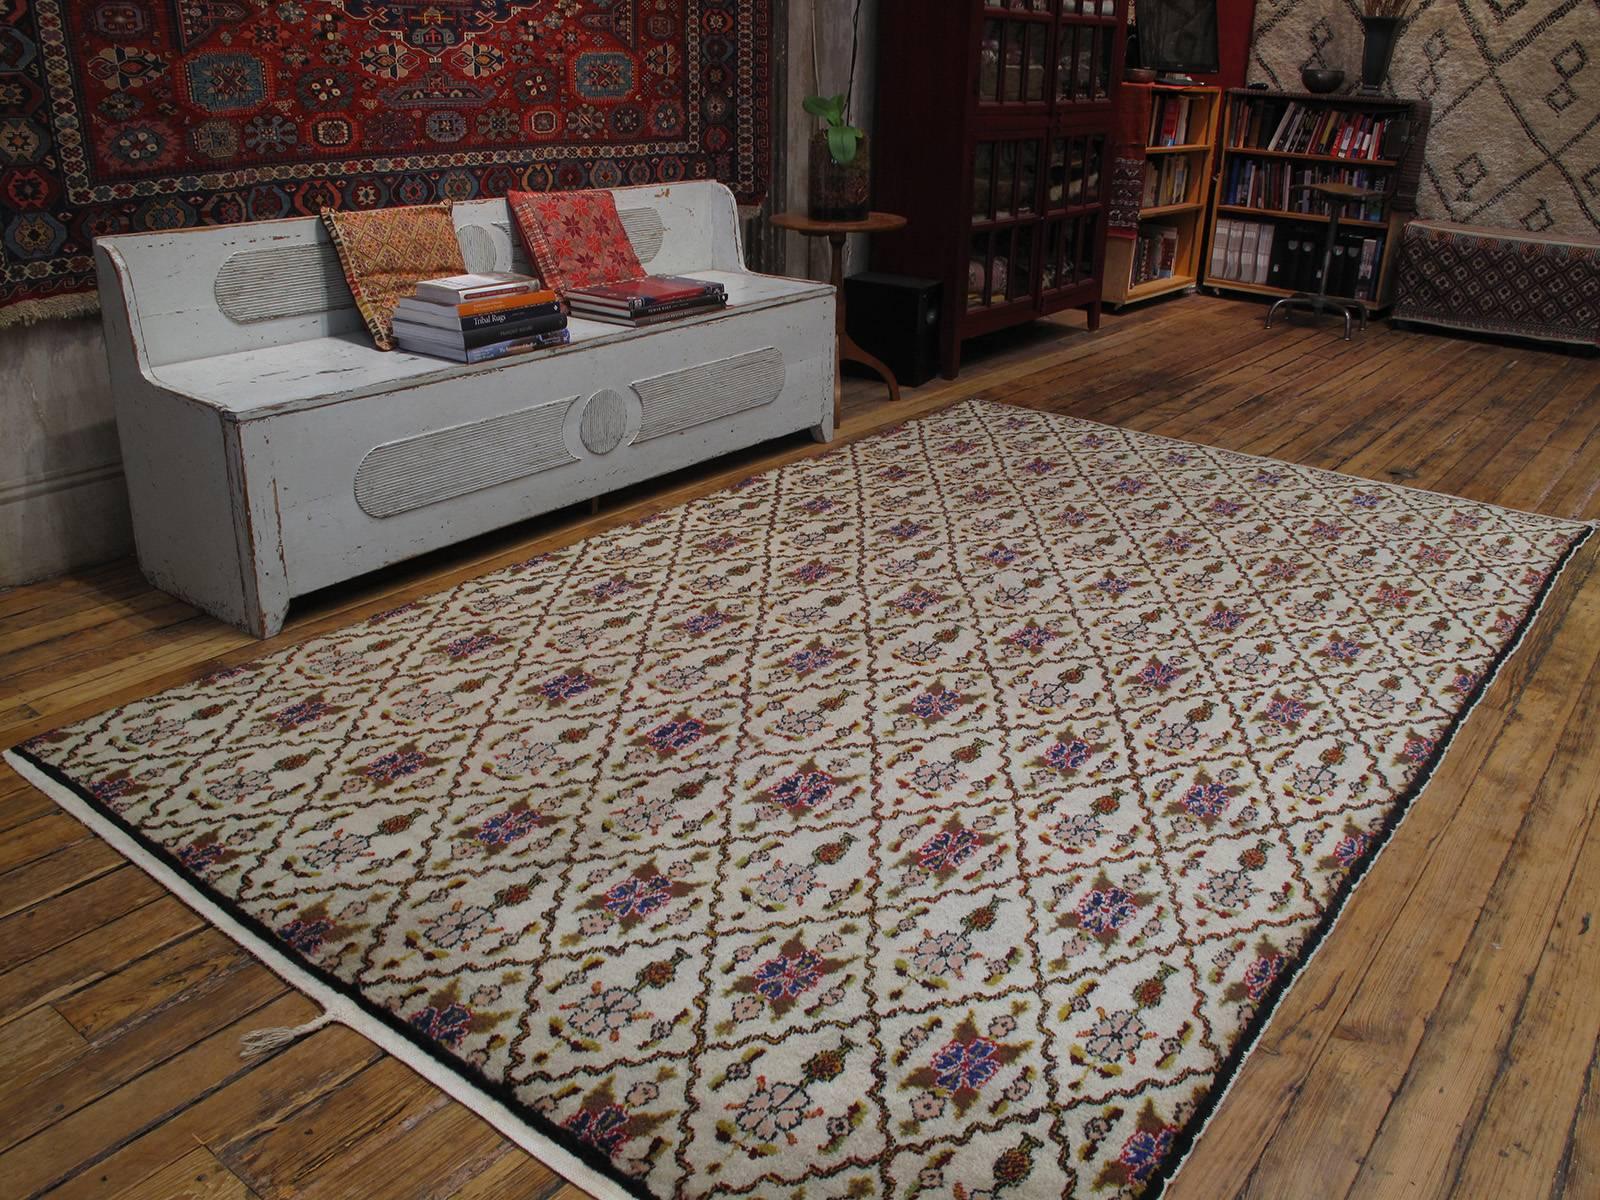 Karaman rug. A charming village rug from Central Turkey with stylized flowers arranged in a grid pattern. Quite large for this type of rug with excellent quality wool.